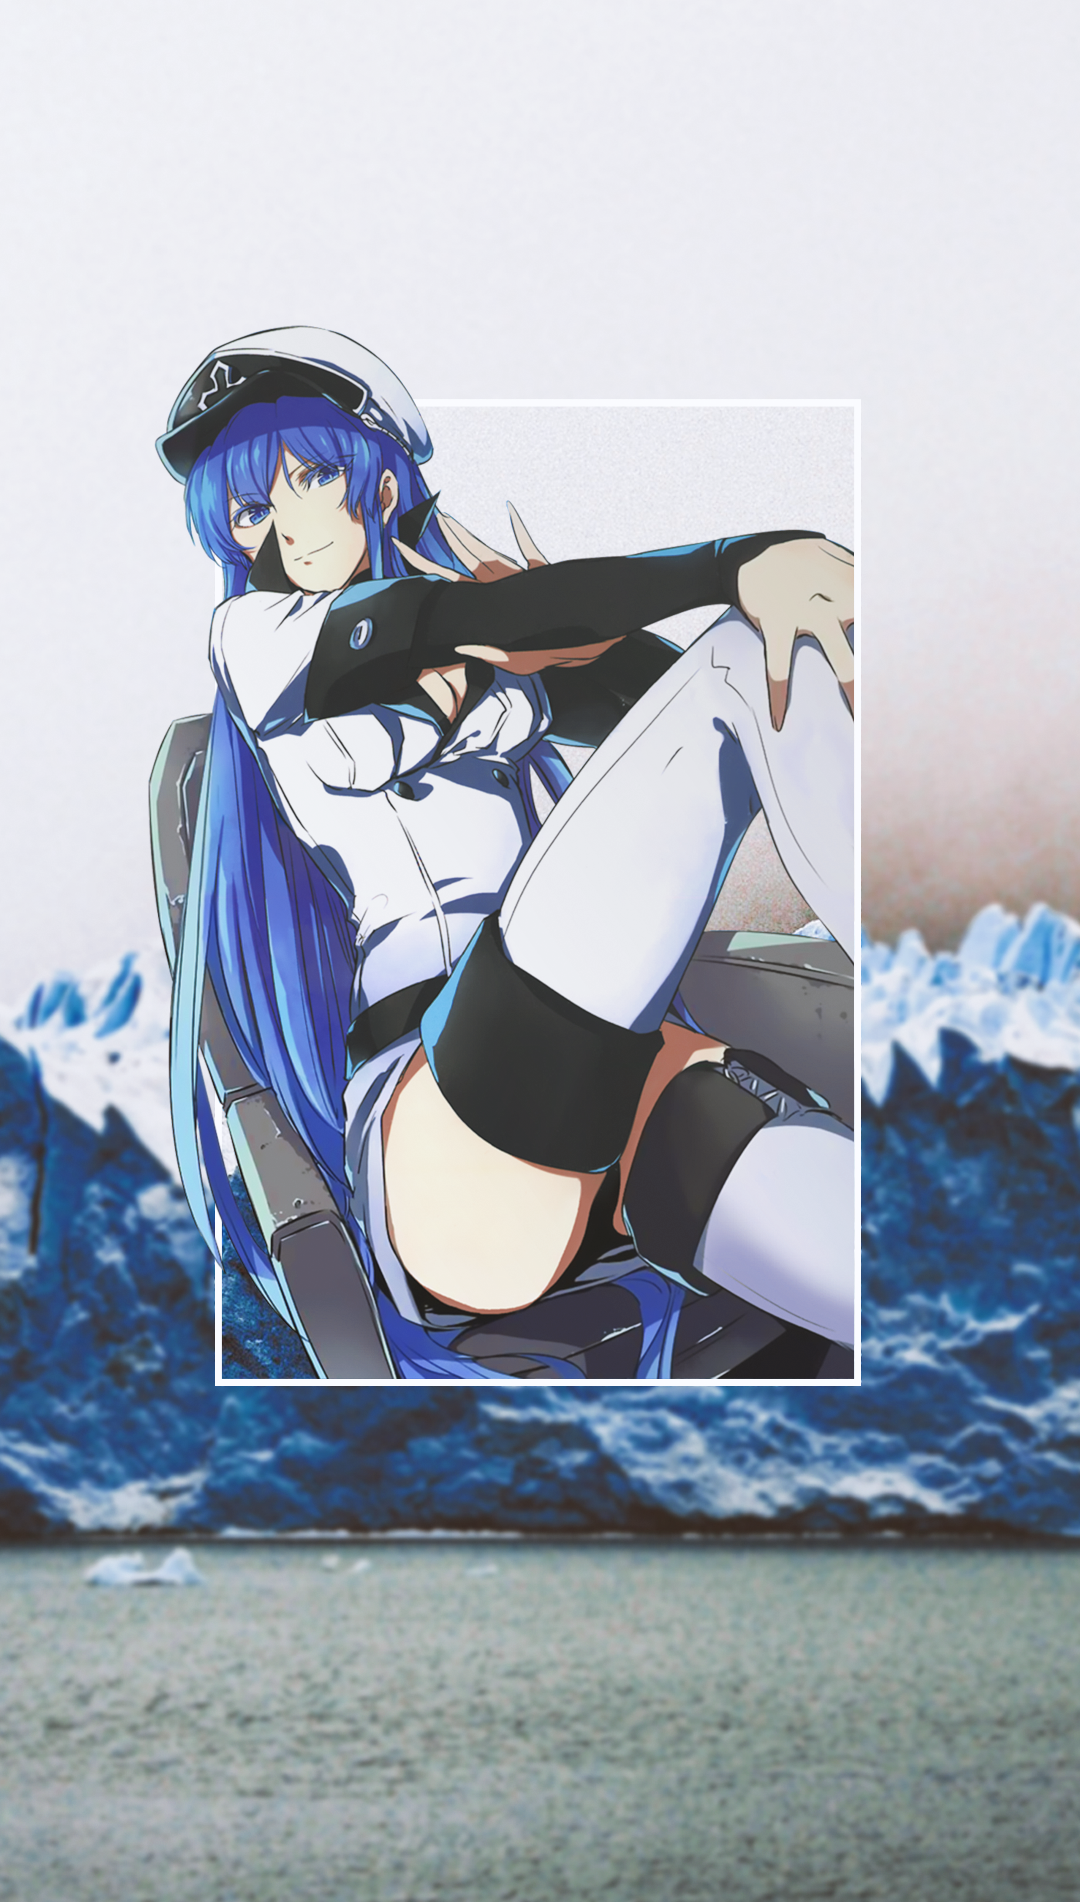 Anime Anime Girls Picture In Picture Cold Esdeath Akame Ga Kill 1080x1902